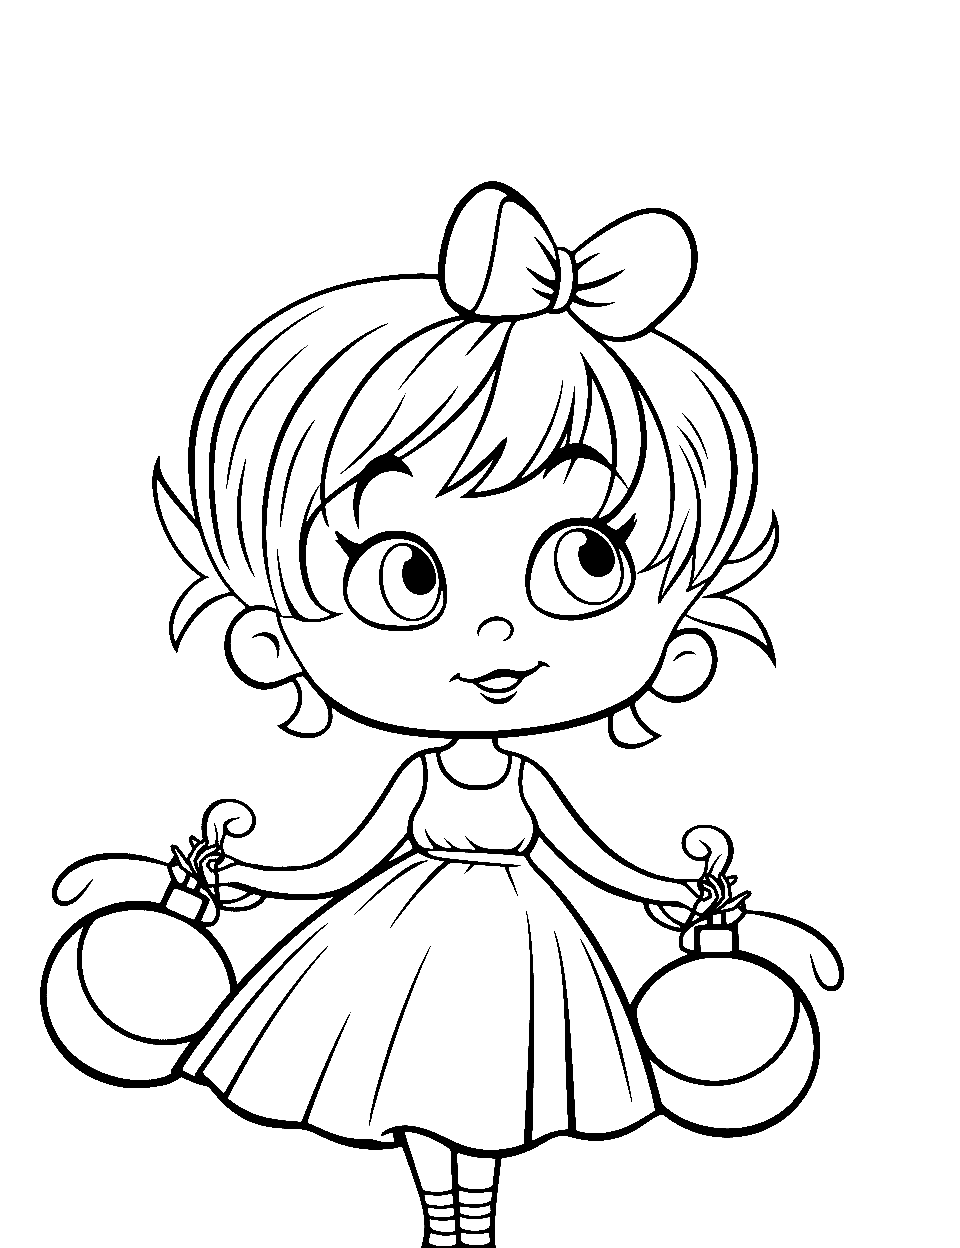 Cindy Lou Who’s Sweet Pose Coloring Page - Cindy Lou Who standing sweetly with a Christmas ornament in her hand.